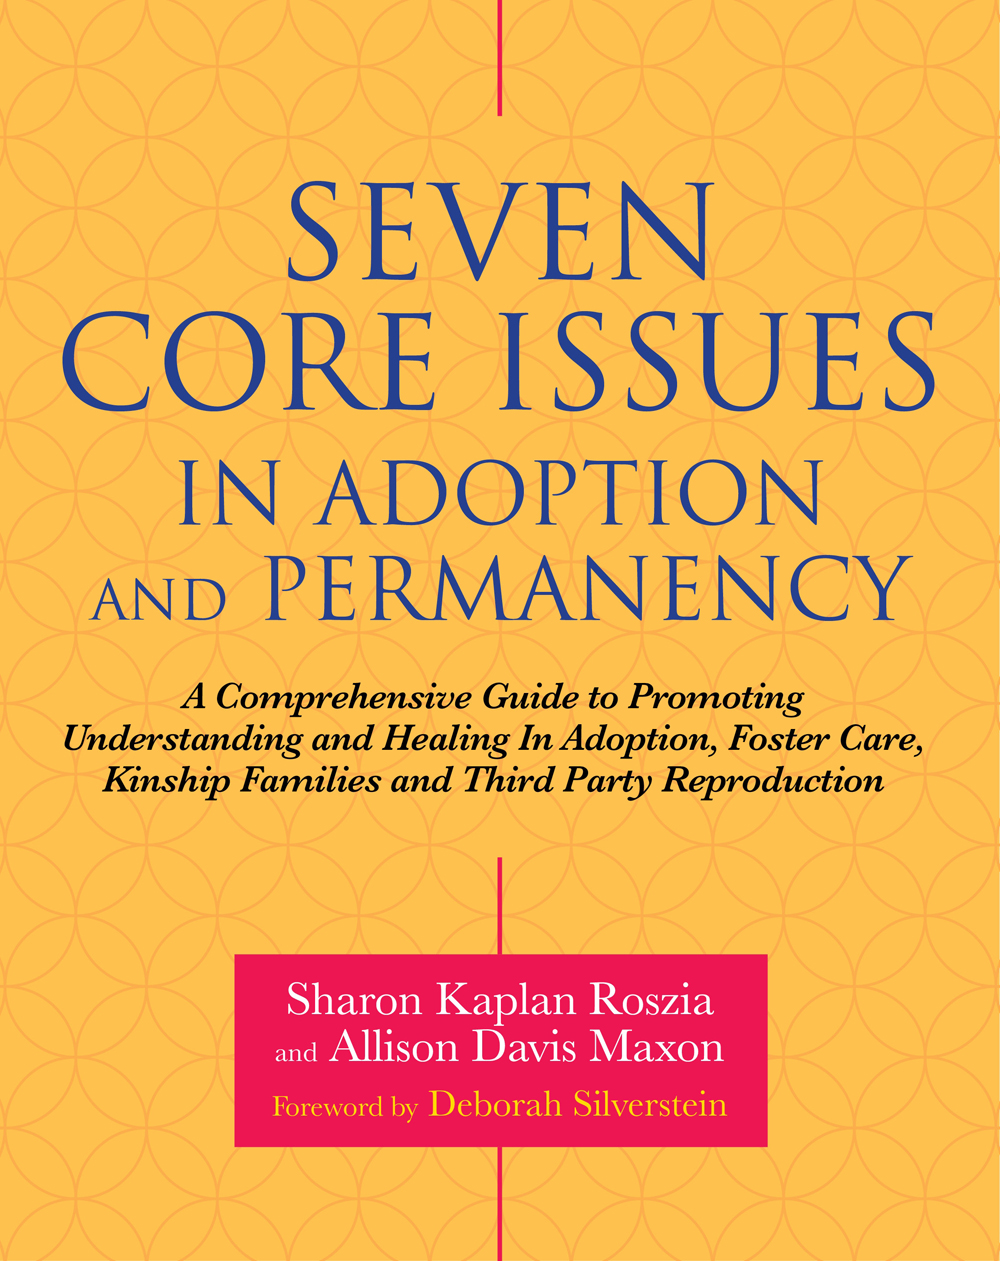 Seven Core Issues in Adoption and Permanency A Comprehensive Guide to Promoting Understanding and Healing In Adoption Foster Care Kinship Families and Third Party Reproduction - image 1